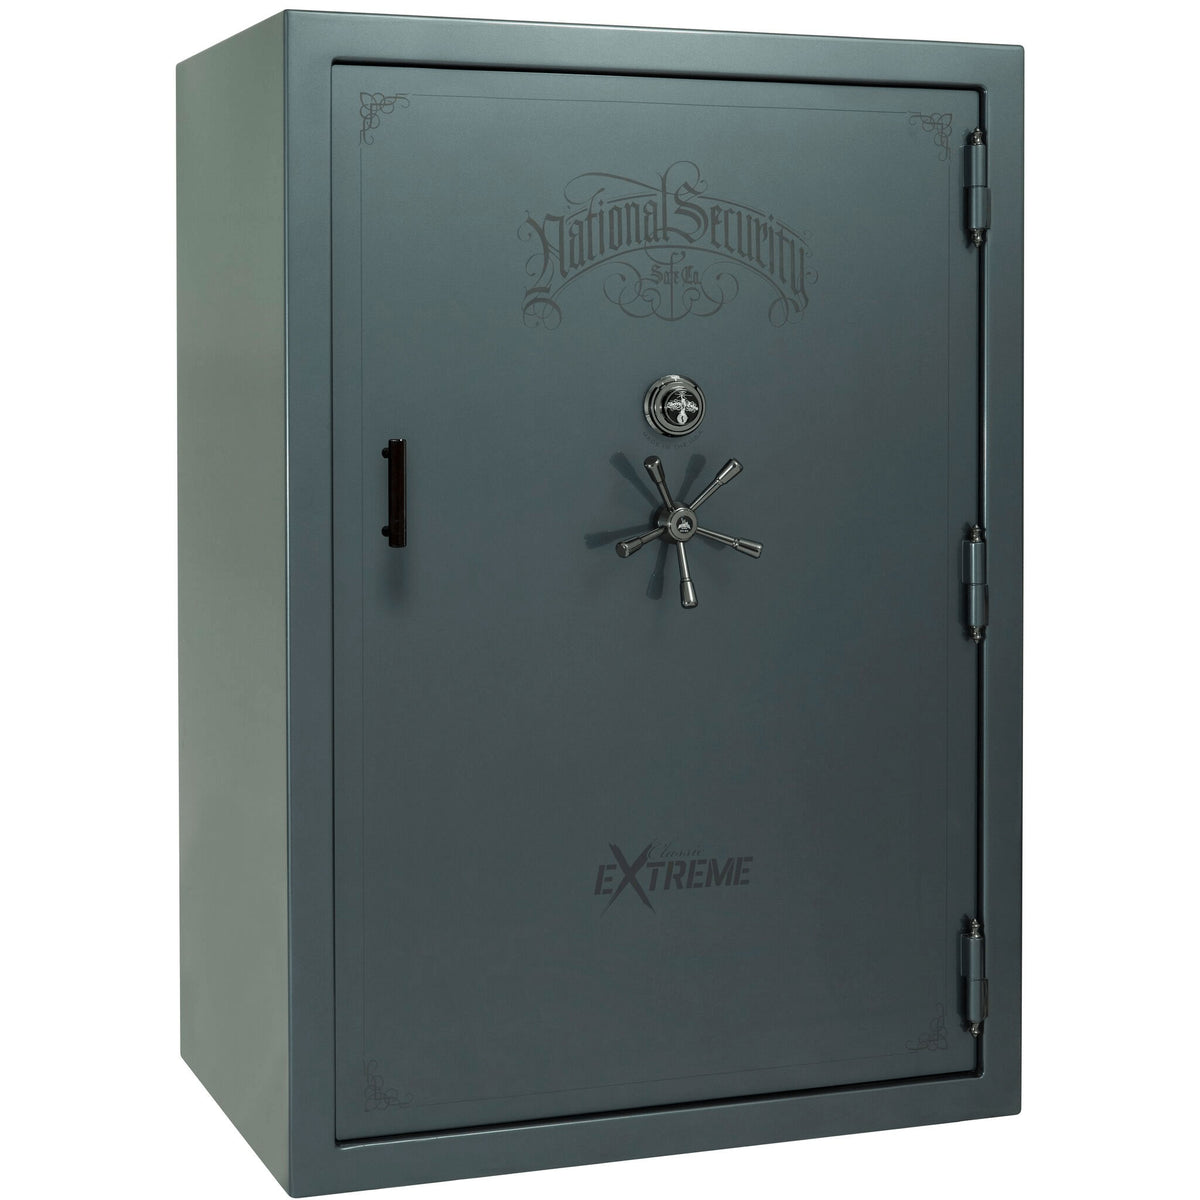 Liberty Classic Select Extreme Wide Body Safe in Forest Mist Gloss with Black Chrome Mechanical Lock.